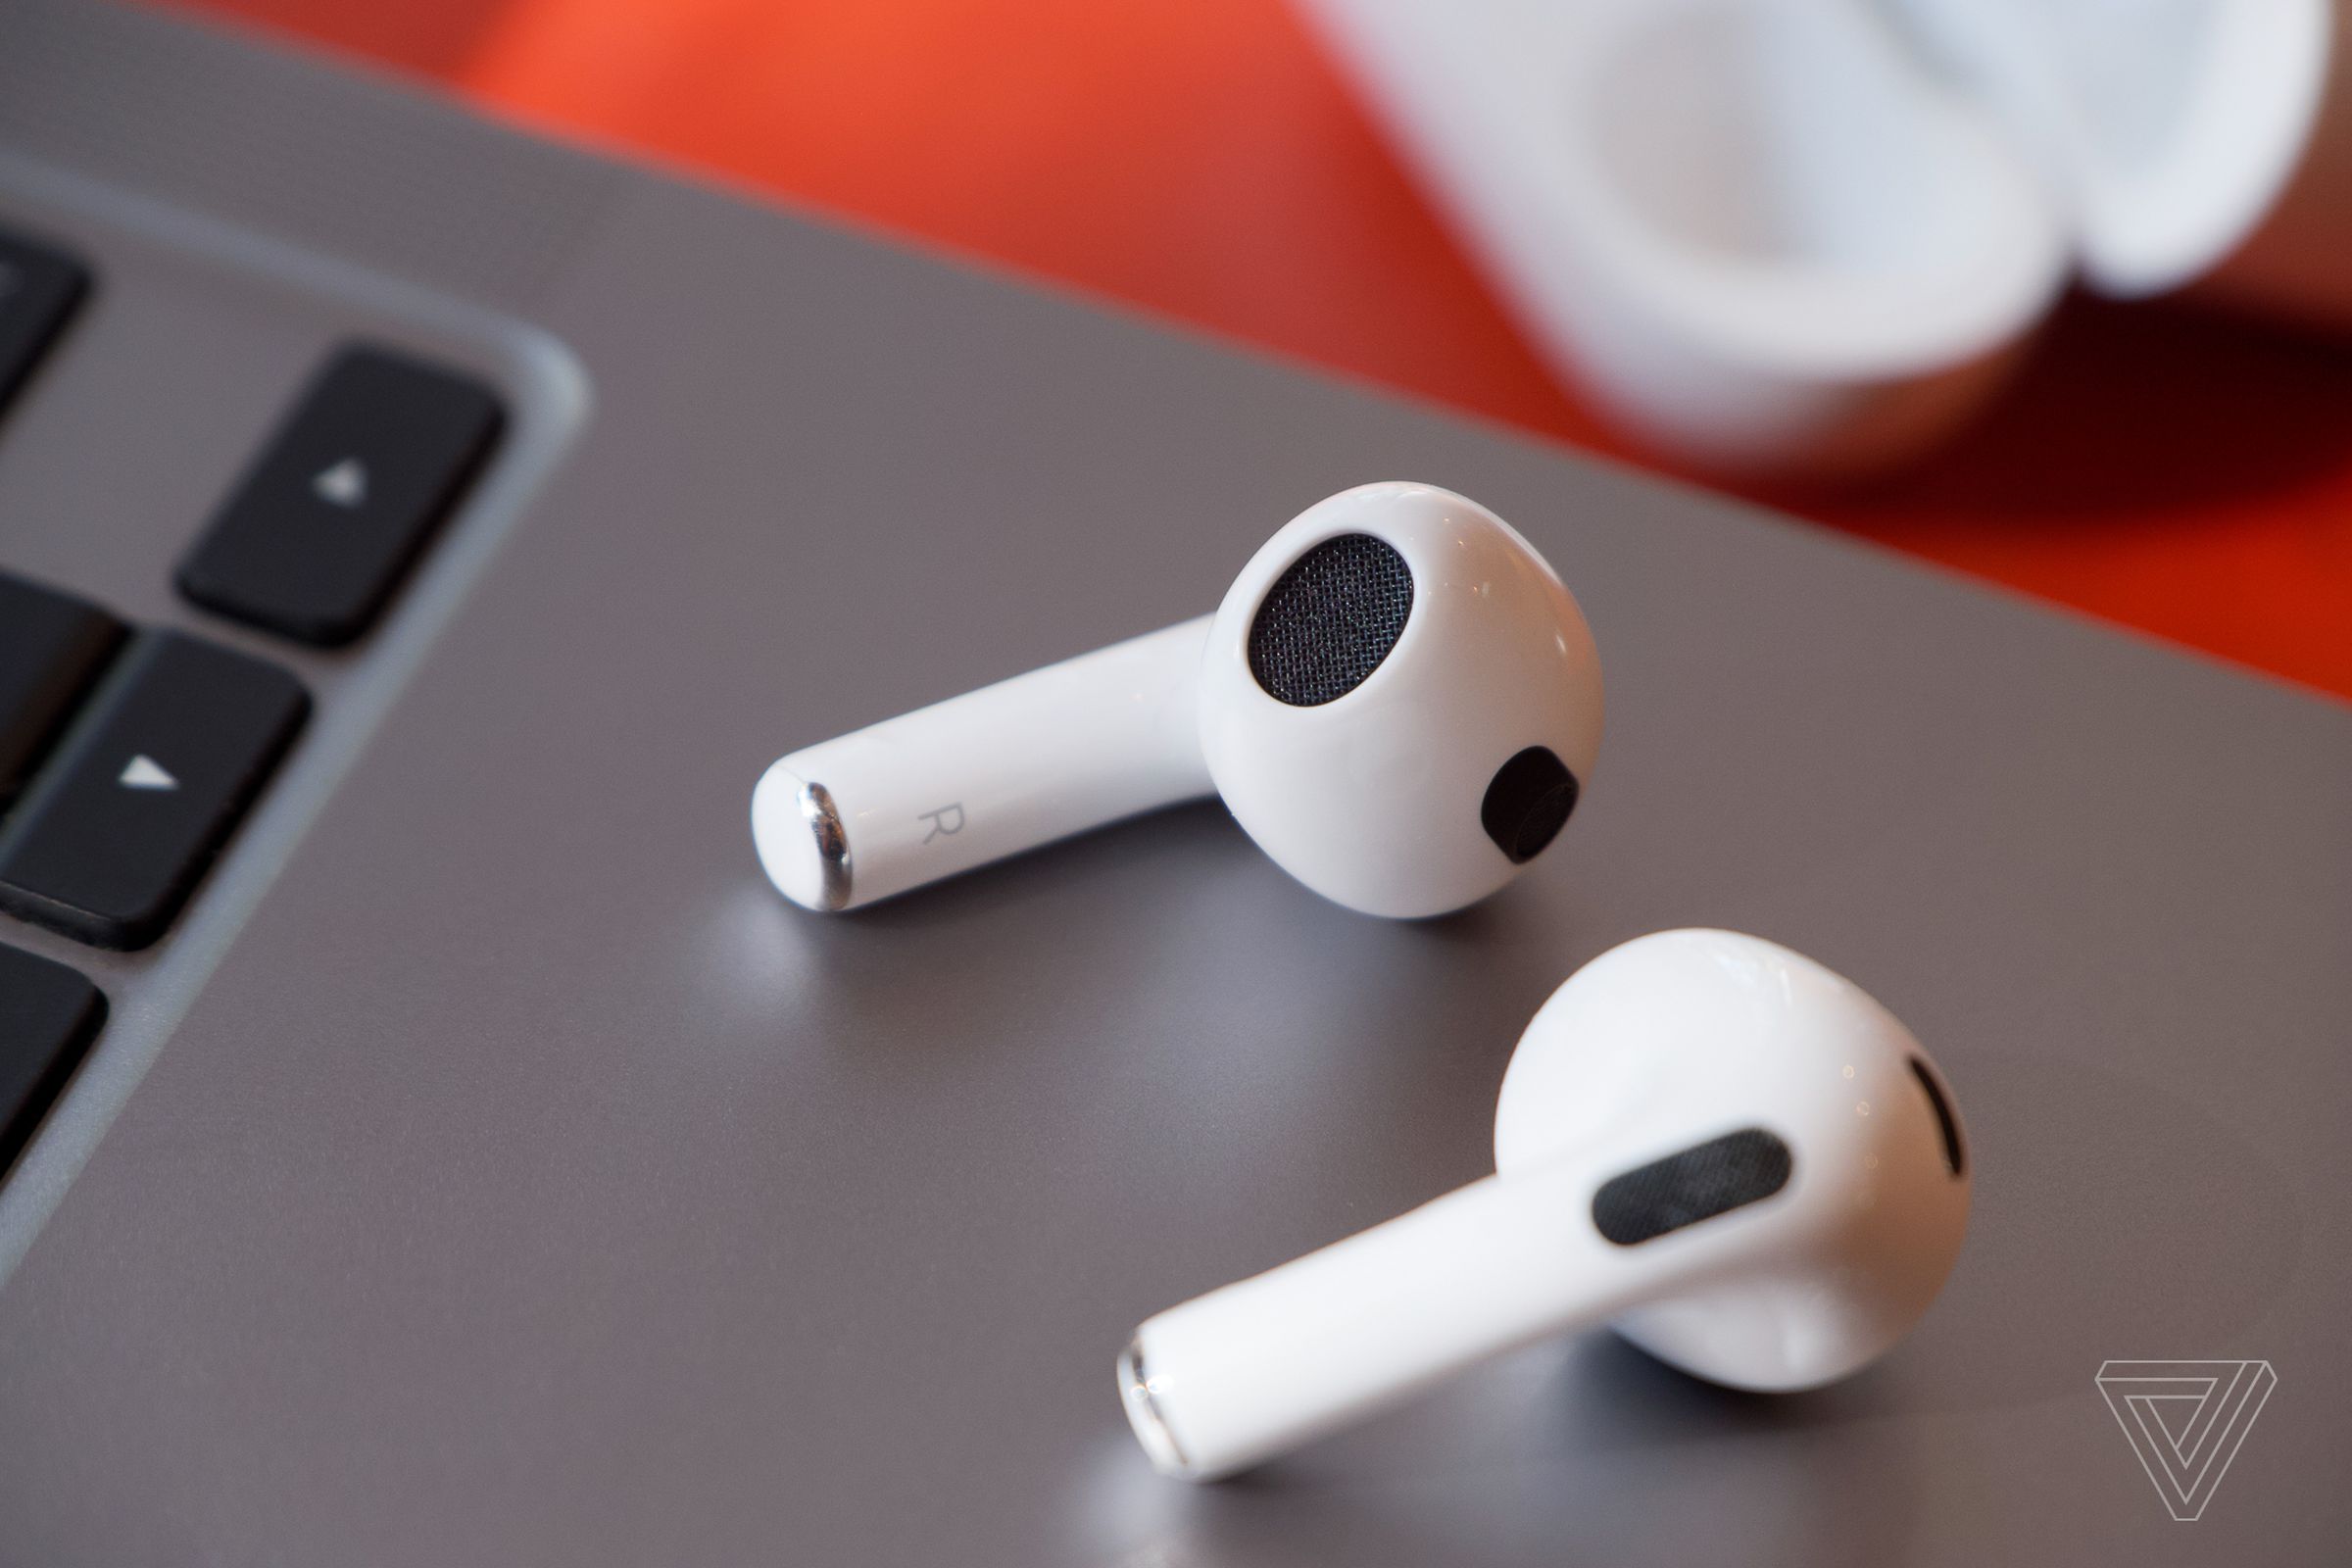 The third-gen AirPods have redesigned drivers and support spatial audio with head tracking.